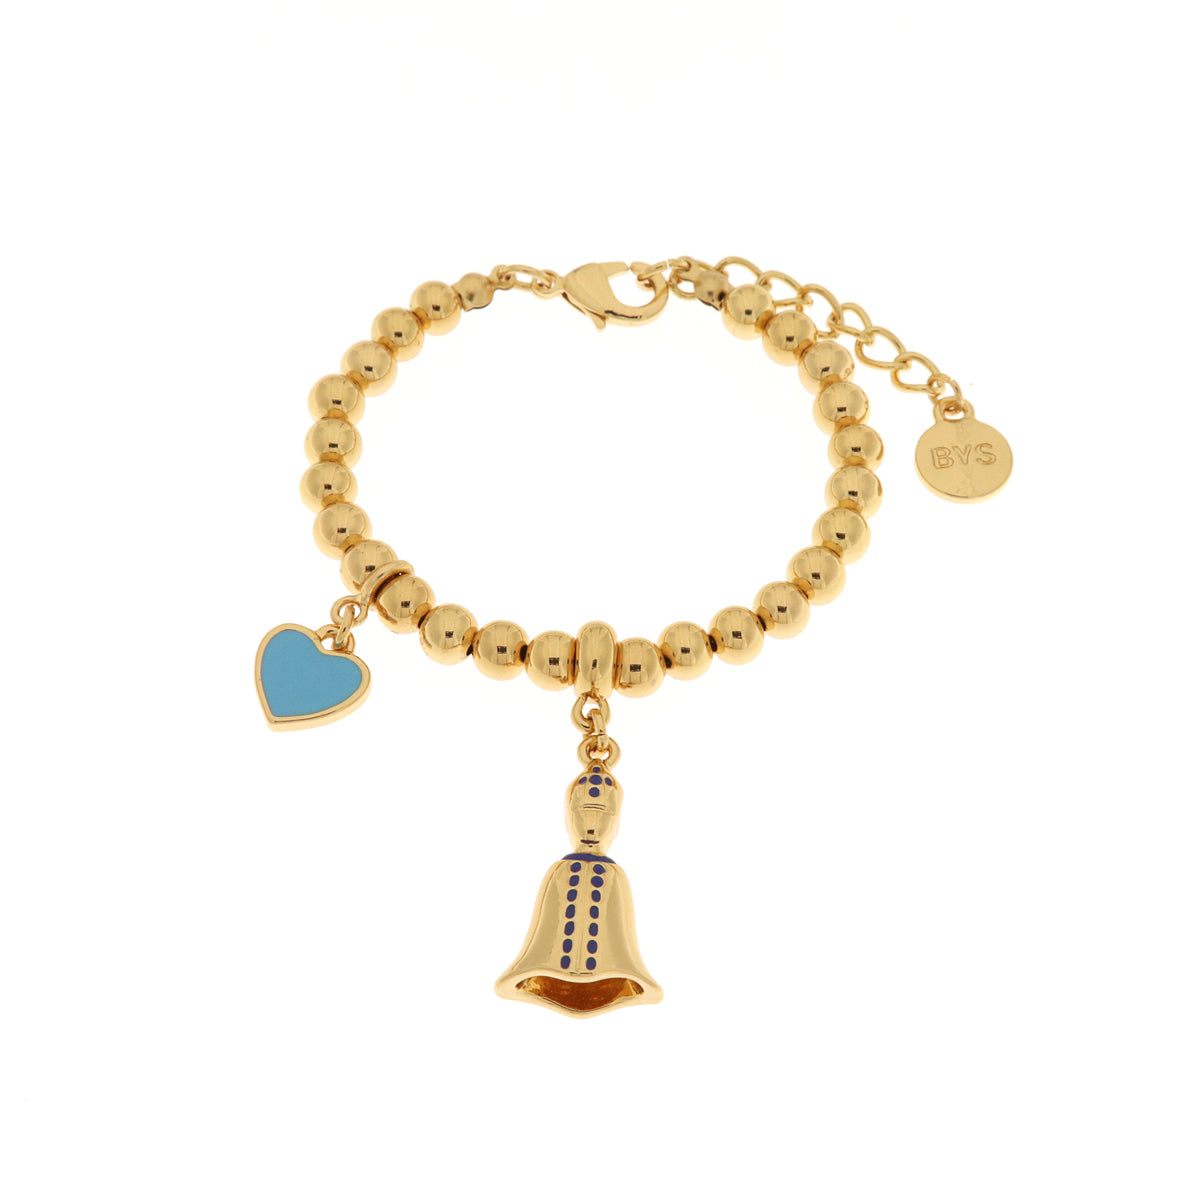 Metal bracelet with San Gennaro pendant and blue heart